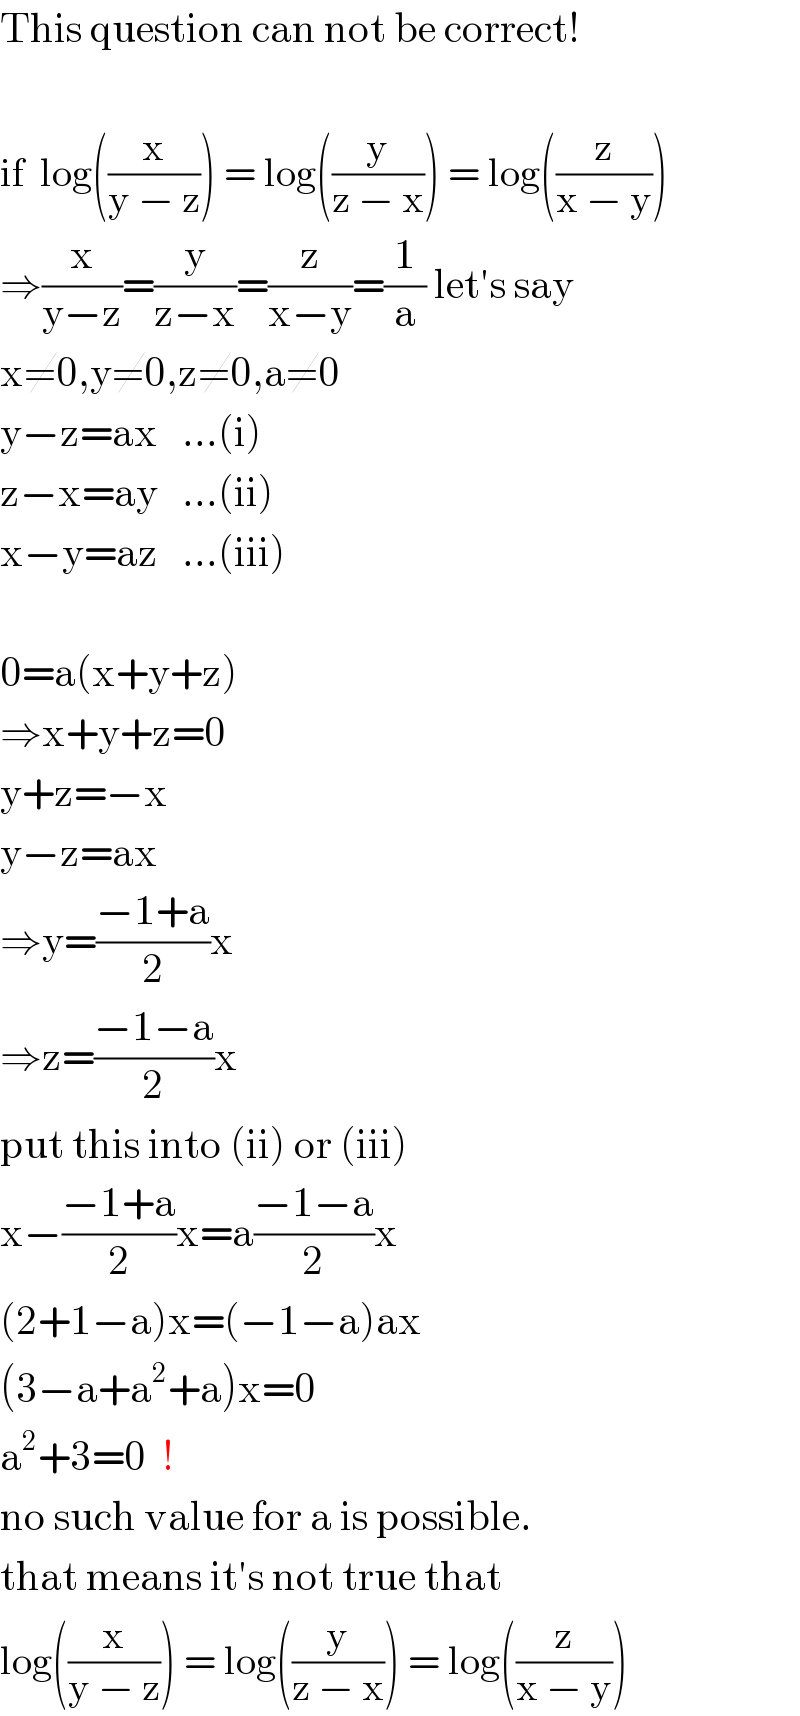 This question can not be correct!    if  log((x/(y − z))) = log((y/(z − x))) = log((z/(x − y)))  ⇒(x/(y−z))=(y/(z−x))=(z/(x−y))=(1/a) let′s say  x≠0,y≠0,z≠0,a≠0  y−z=ax   ...(i)  z−x=ay   ...(ii)  x−y=az   ...(iii)    0=a(x+y+z)  ⇒x+y+z=0  y+z=−x  y−z=ax  ⇒y=((−1+a)/2)x  ⇒z=((−1−a)/2)x  put this into (ii) or (iii)  x−((−1+a)/2)x=a((−1−a)/2)x  (2+1−a)x=(−1−a)ax  (3−a+a^2 +a)x=0  a^2 +3=0  !  no such value for a is possible.  that means it′s not true that  log((x/(y − z))) = log((y/(z − x))) = log((z/(x − y)))  